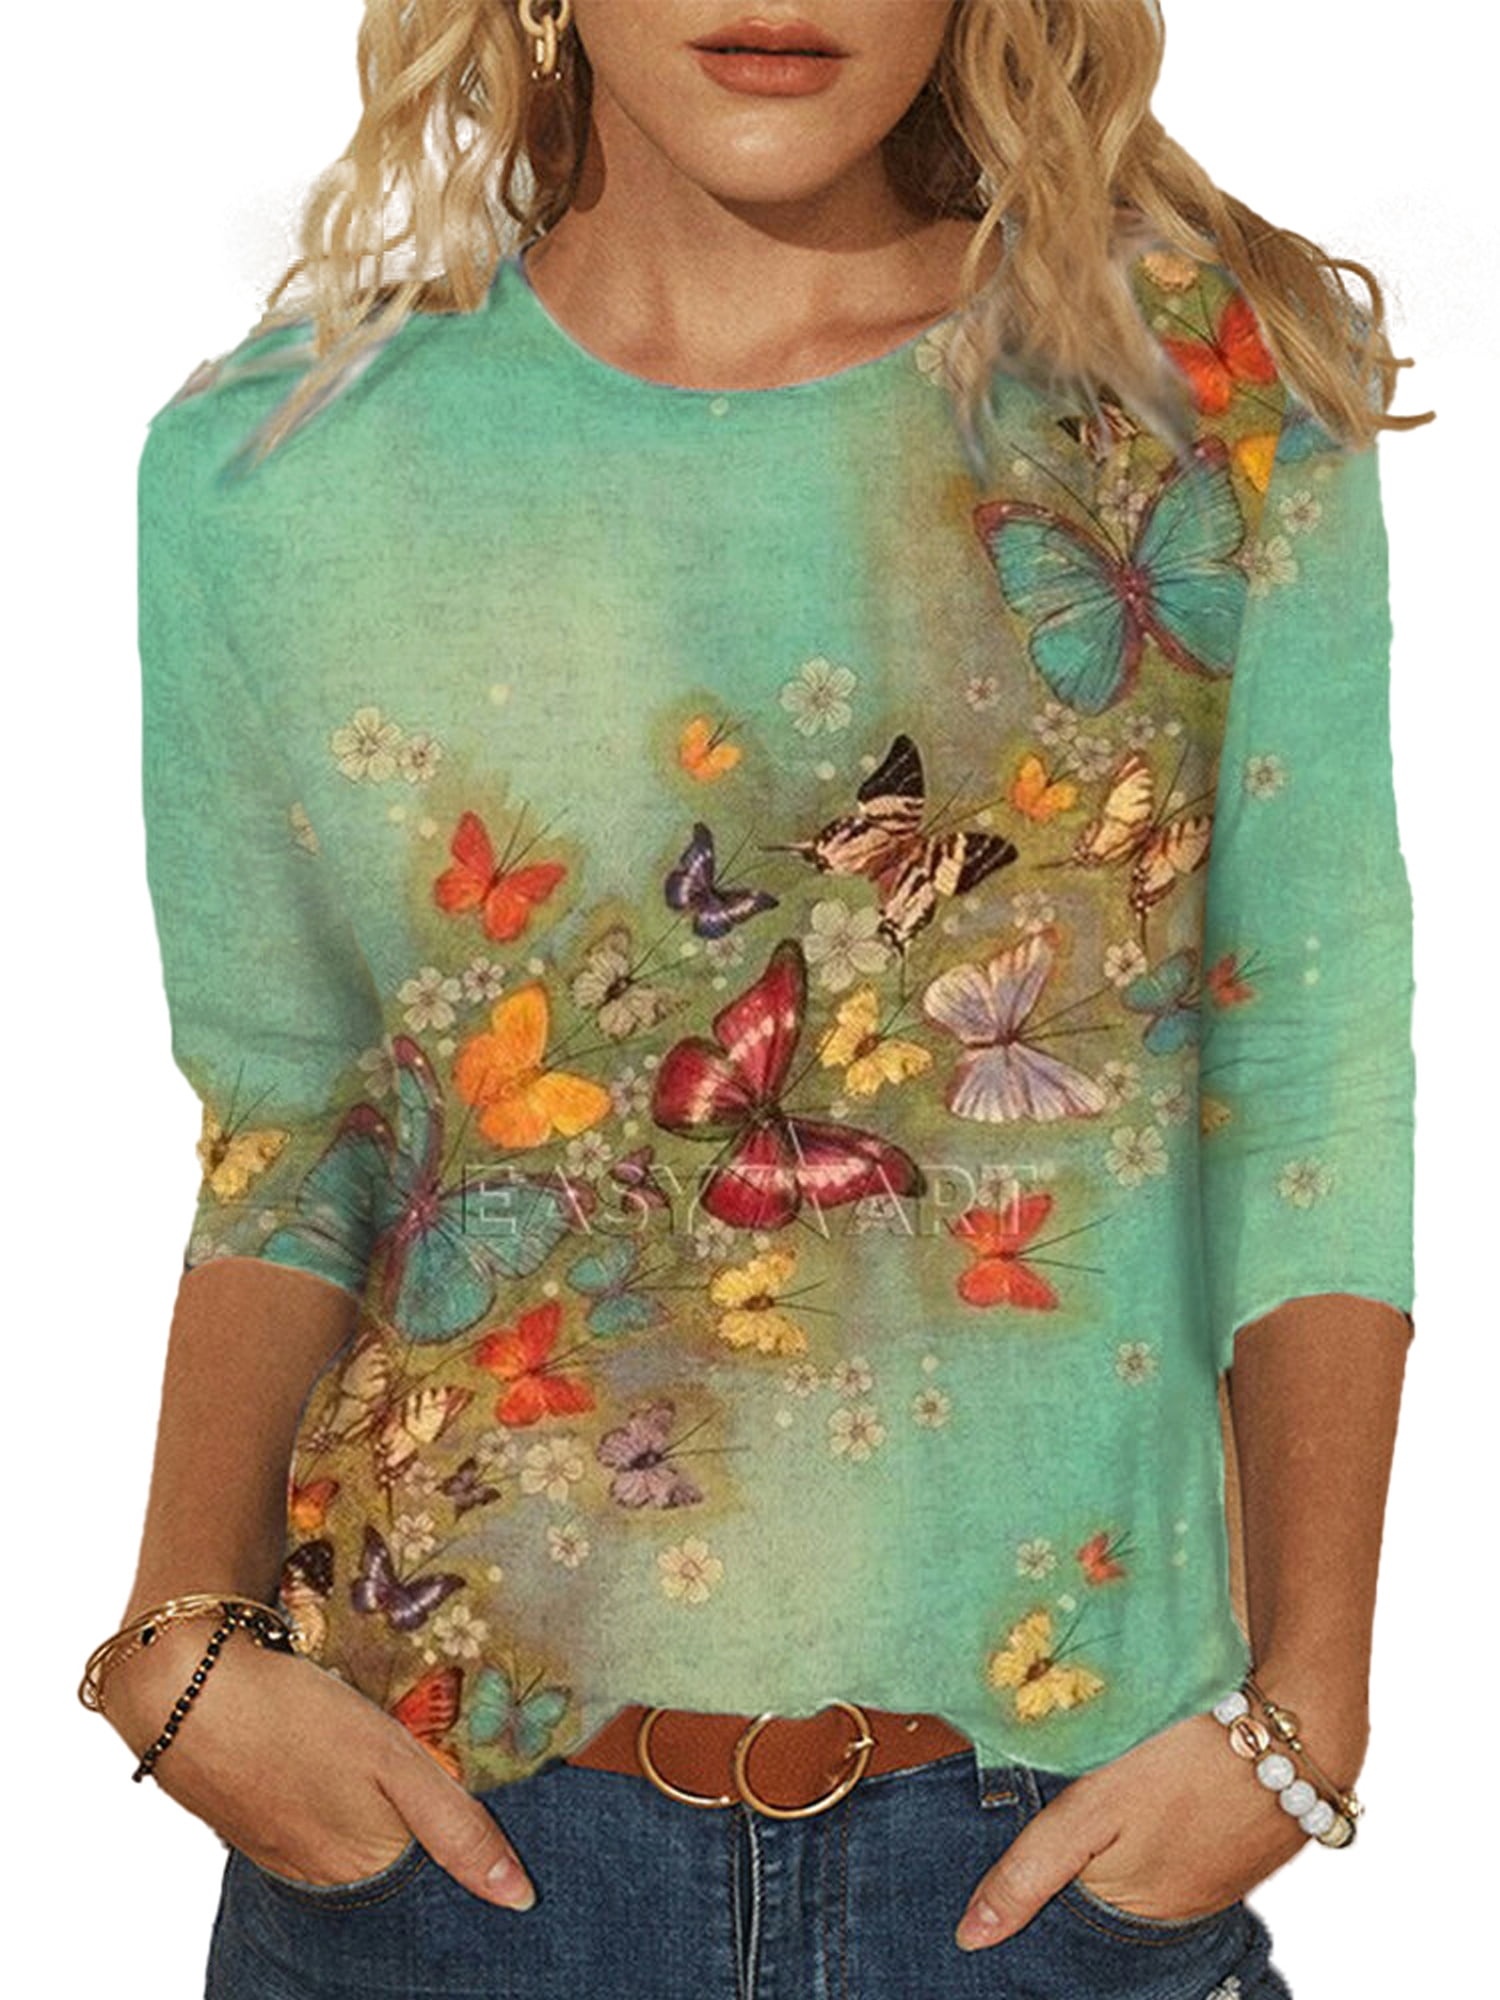 3/4 Sleeves Tops Womens Spring Butterflies Graphic T-Shirt Colorful 3D Print Tunic Blouse Casual Crewneck Tee Shirts